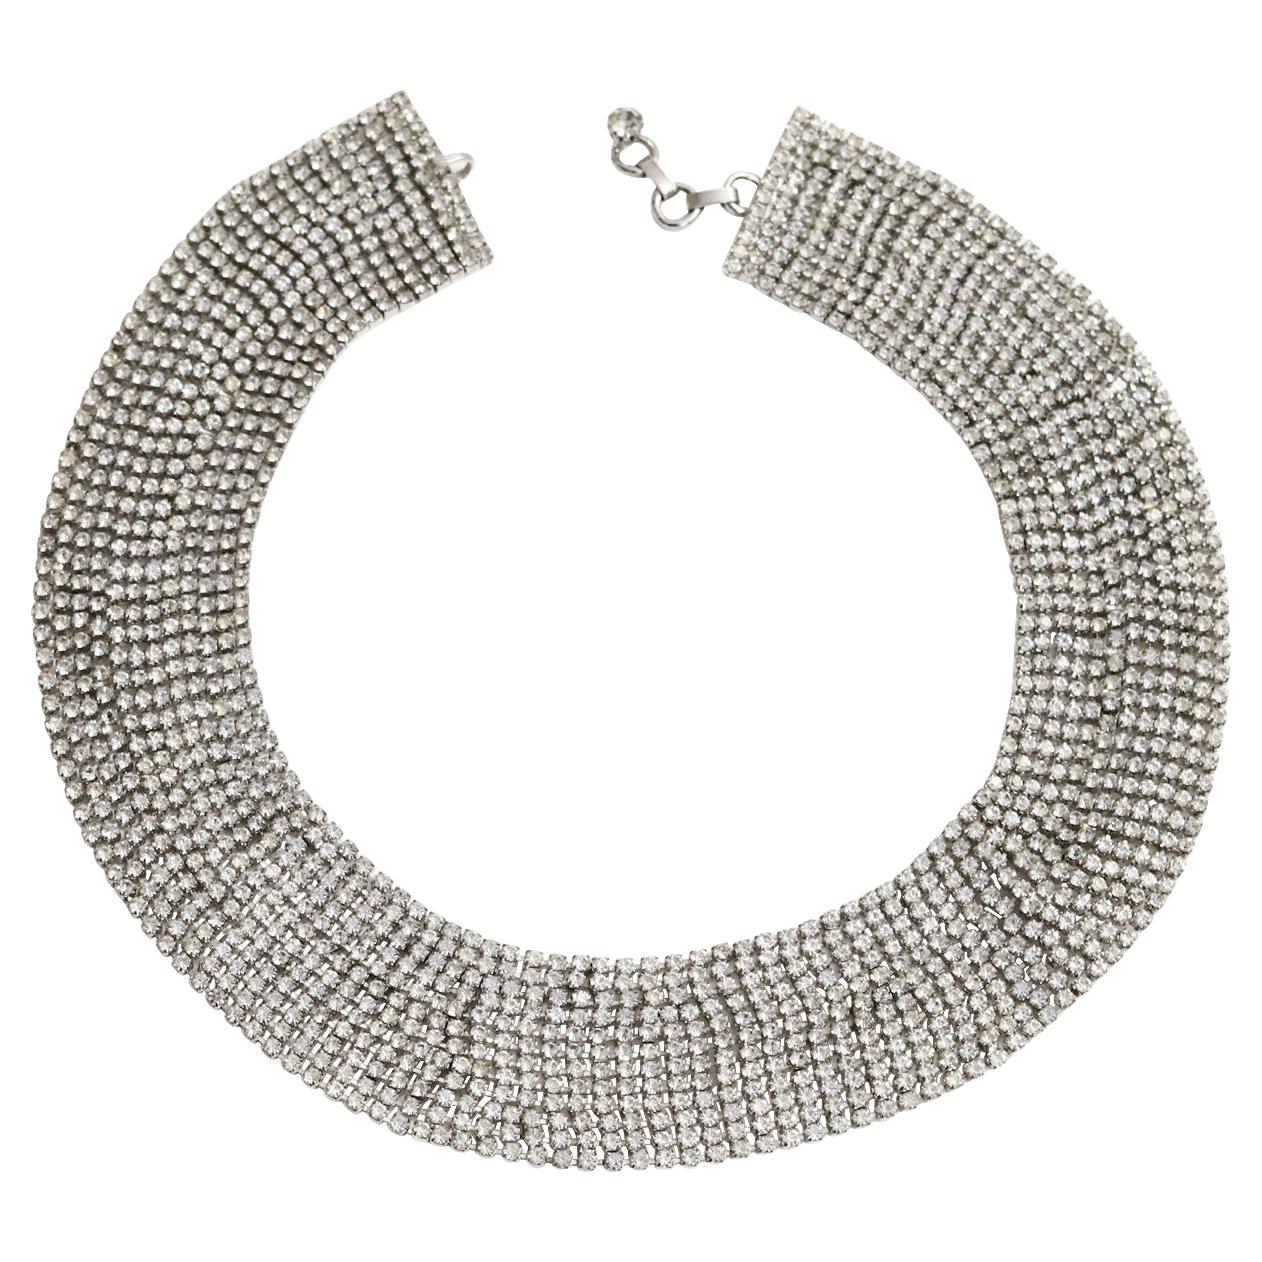 Vintage Pauline Trigere Diamante Wide Collar Necklace Circa 1980s. A great necklace that could easily be worn with t shirt and jeans and mixed with a gold necklace as well as it can be worn for a dressed up occasion. Just one of the classics that